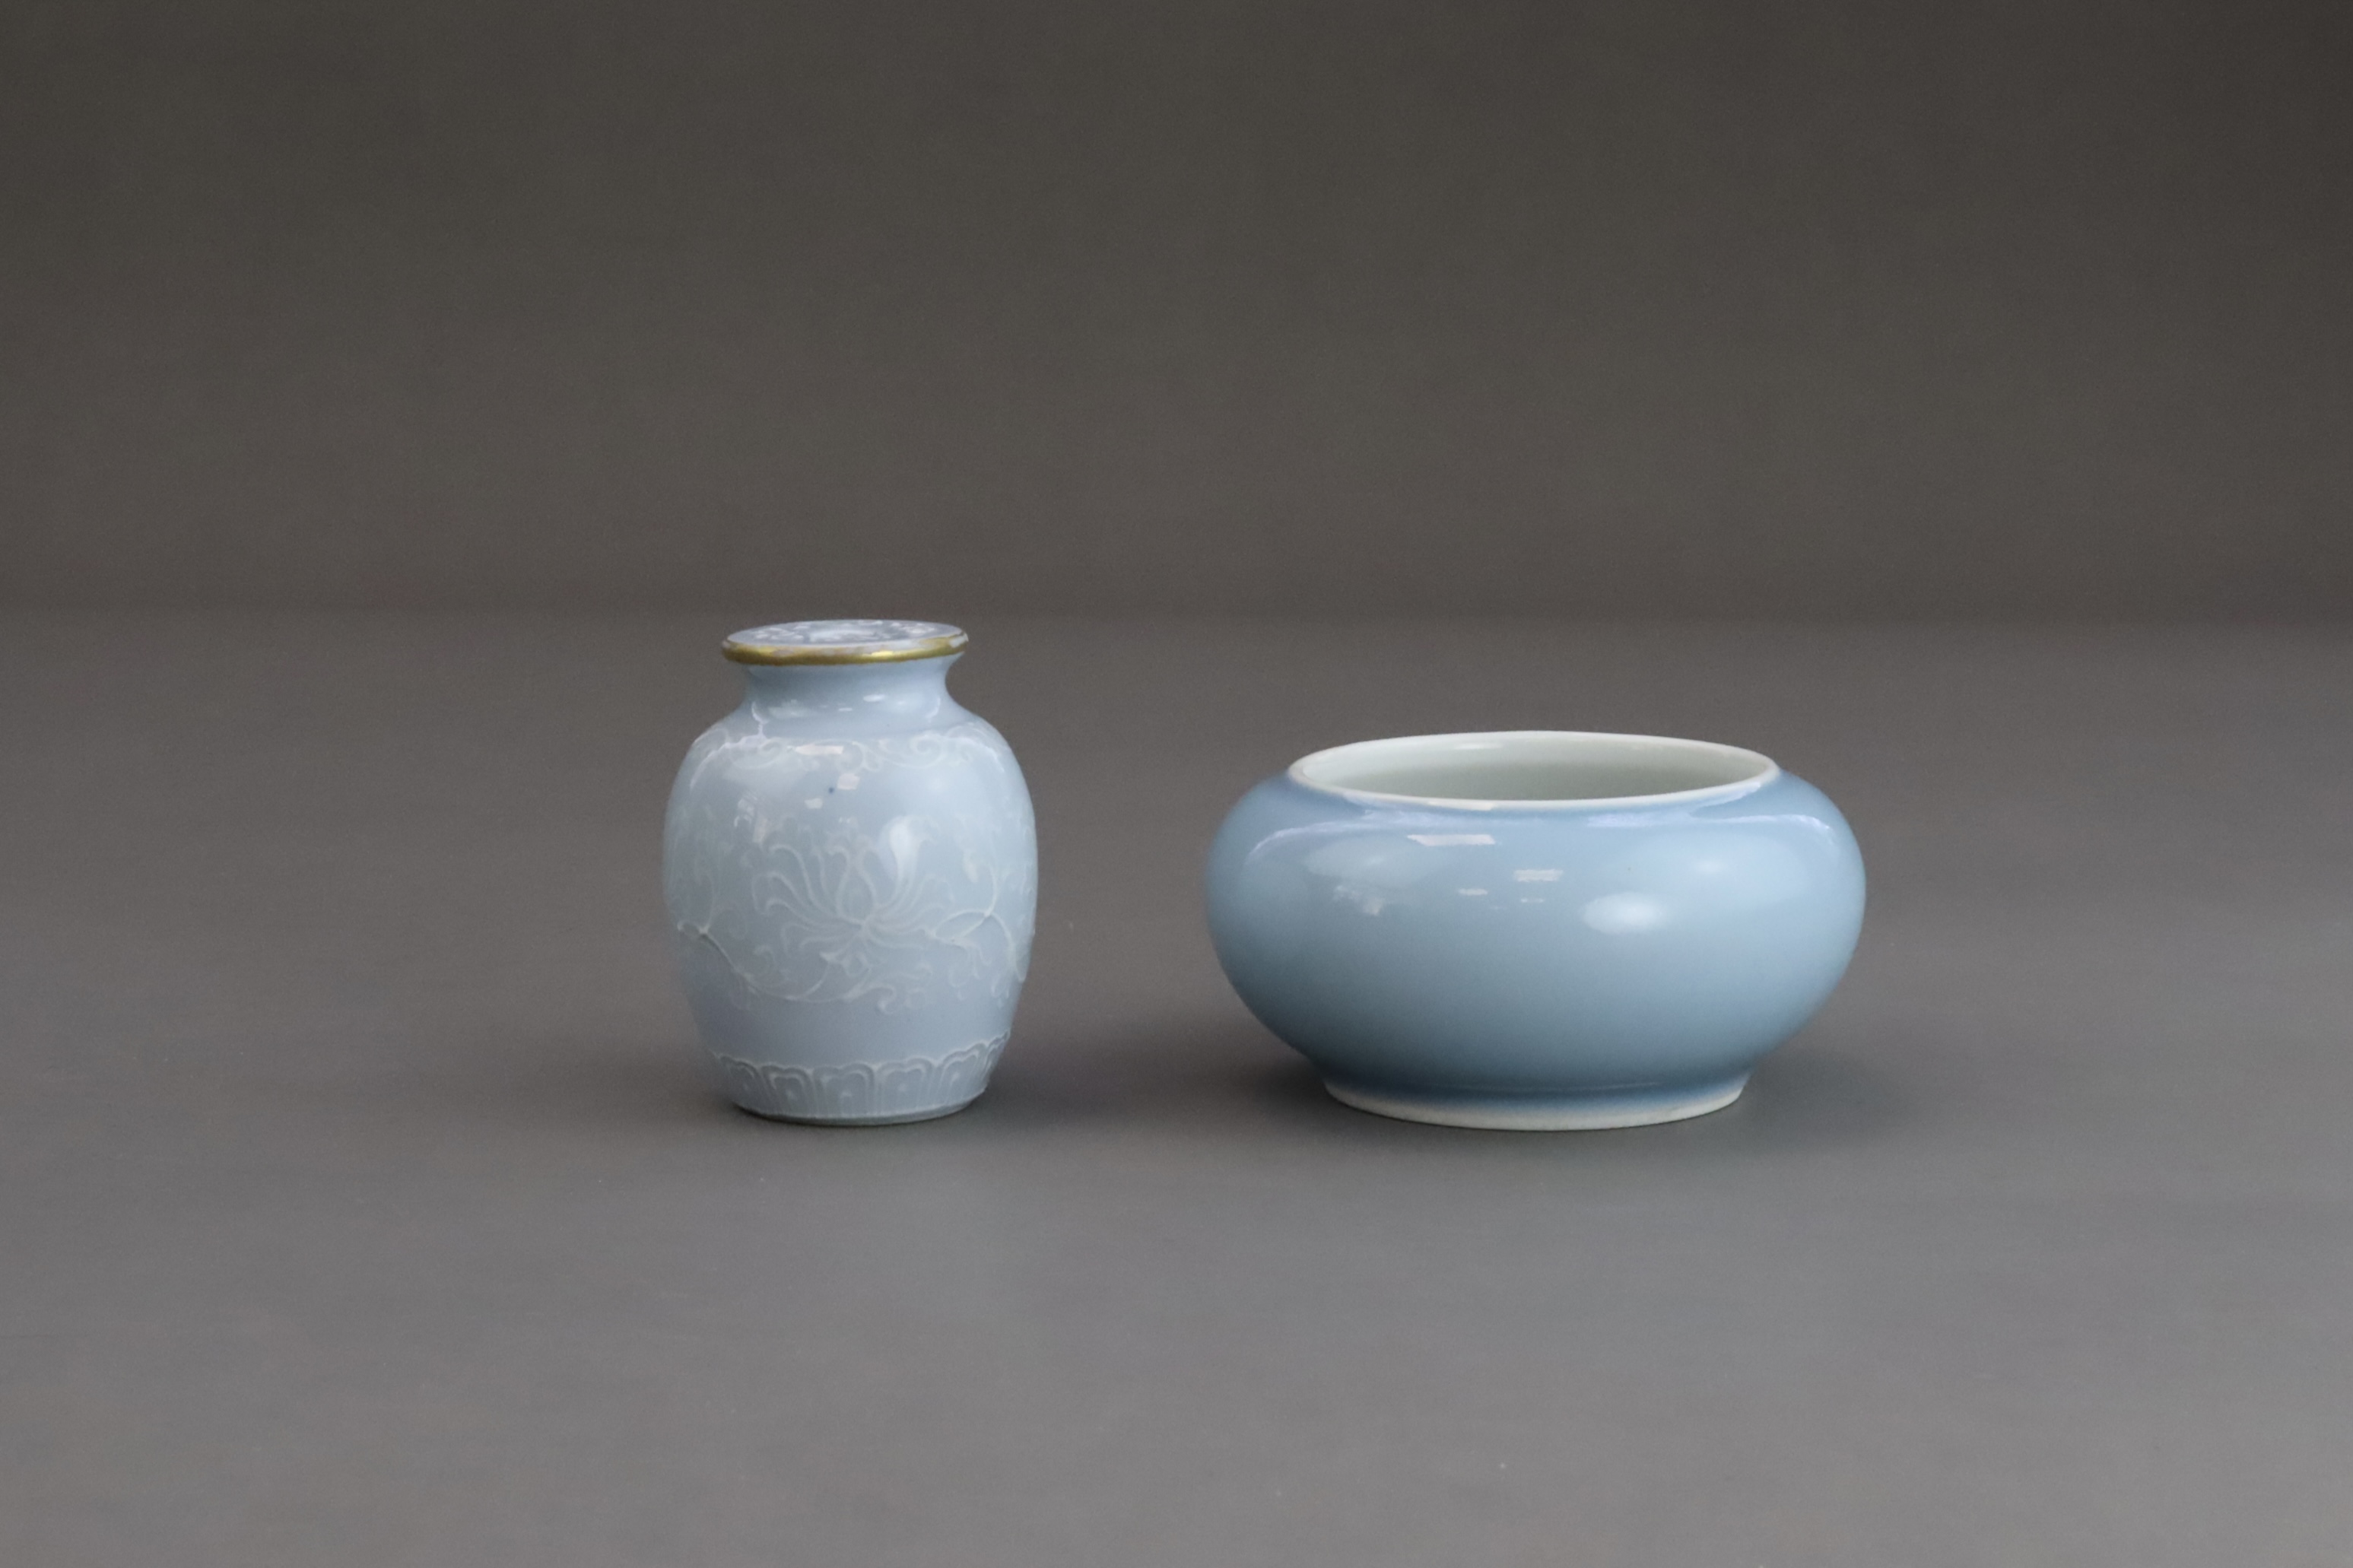  'Clair de lune': A Brushwasher, Guangxu mark and period, and a Moulded small Jar, Qing dynasty - Image 5 of 7